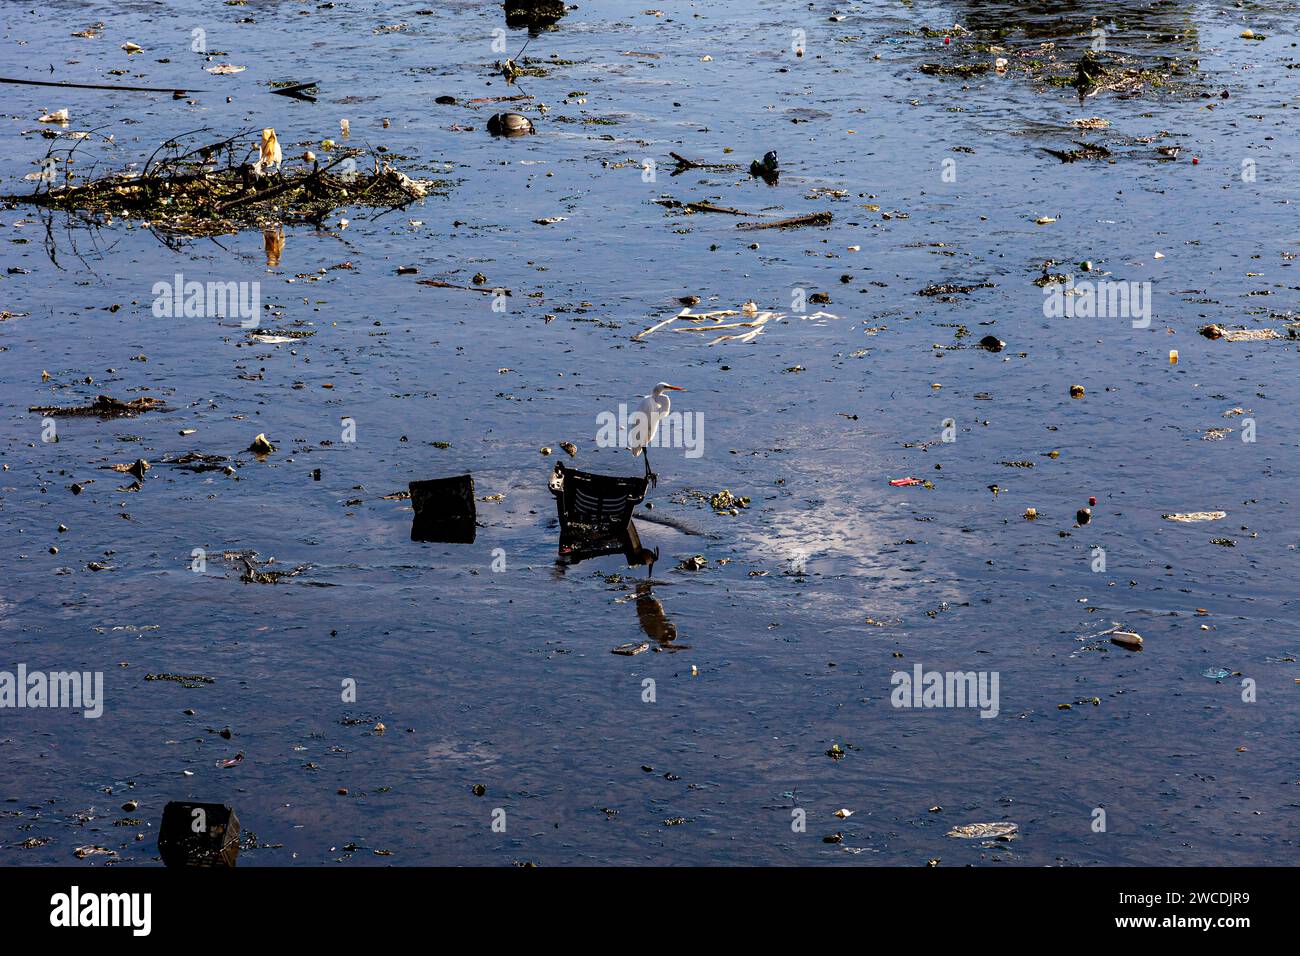 Plastic pollution in Guanabara Bay, heron rests on the plastic structure of a discarded TV set, among all kinds of incorrectly discarded waste products, Rio de Janeiro, Brazil. Stock Photo